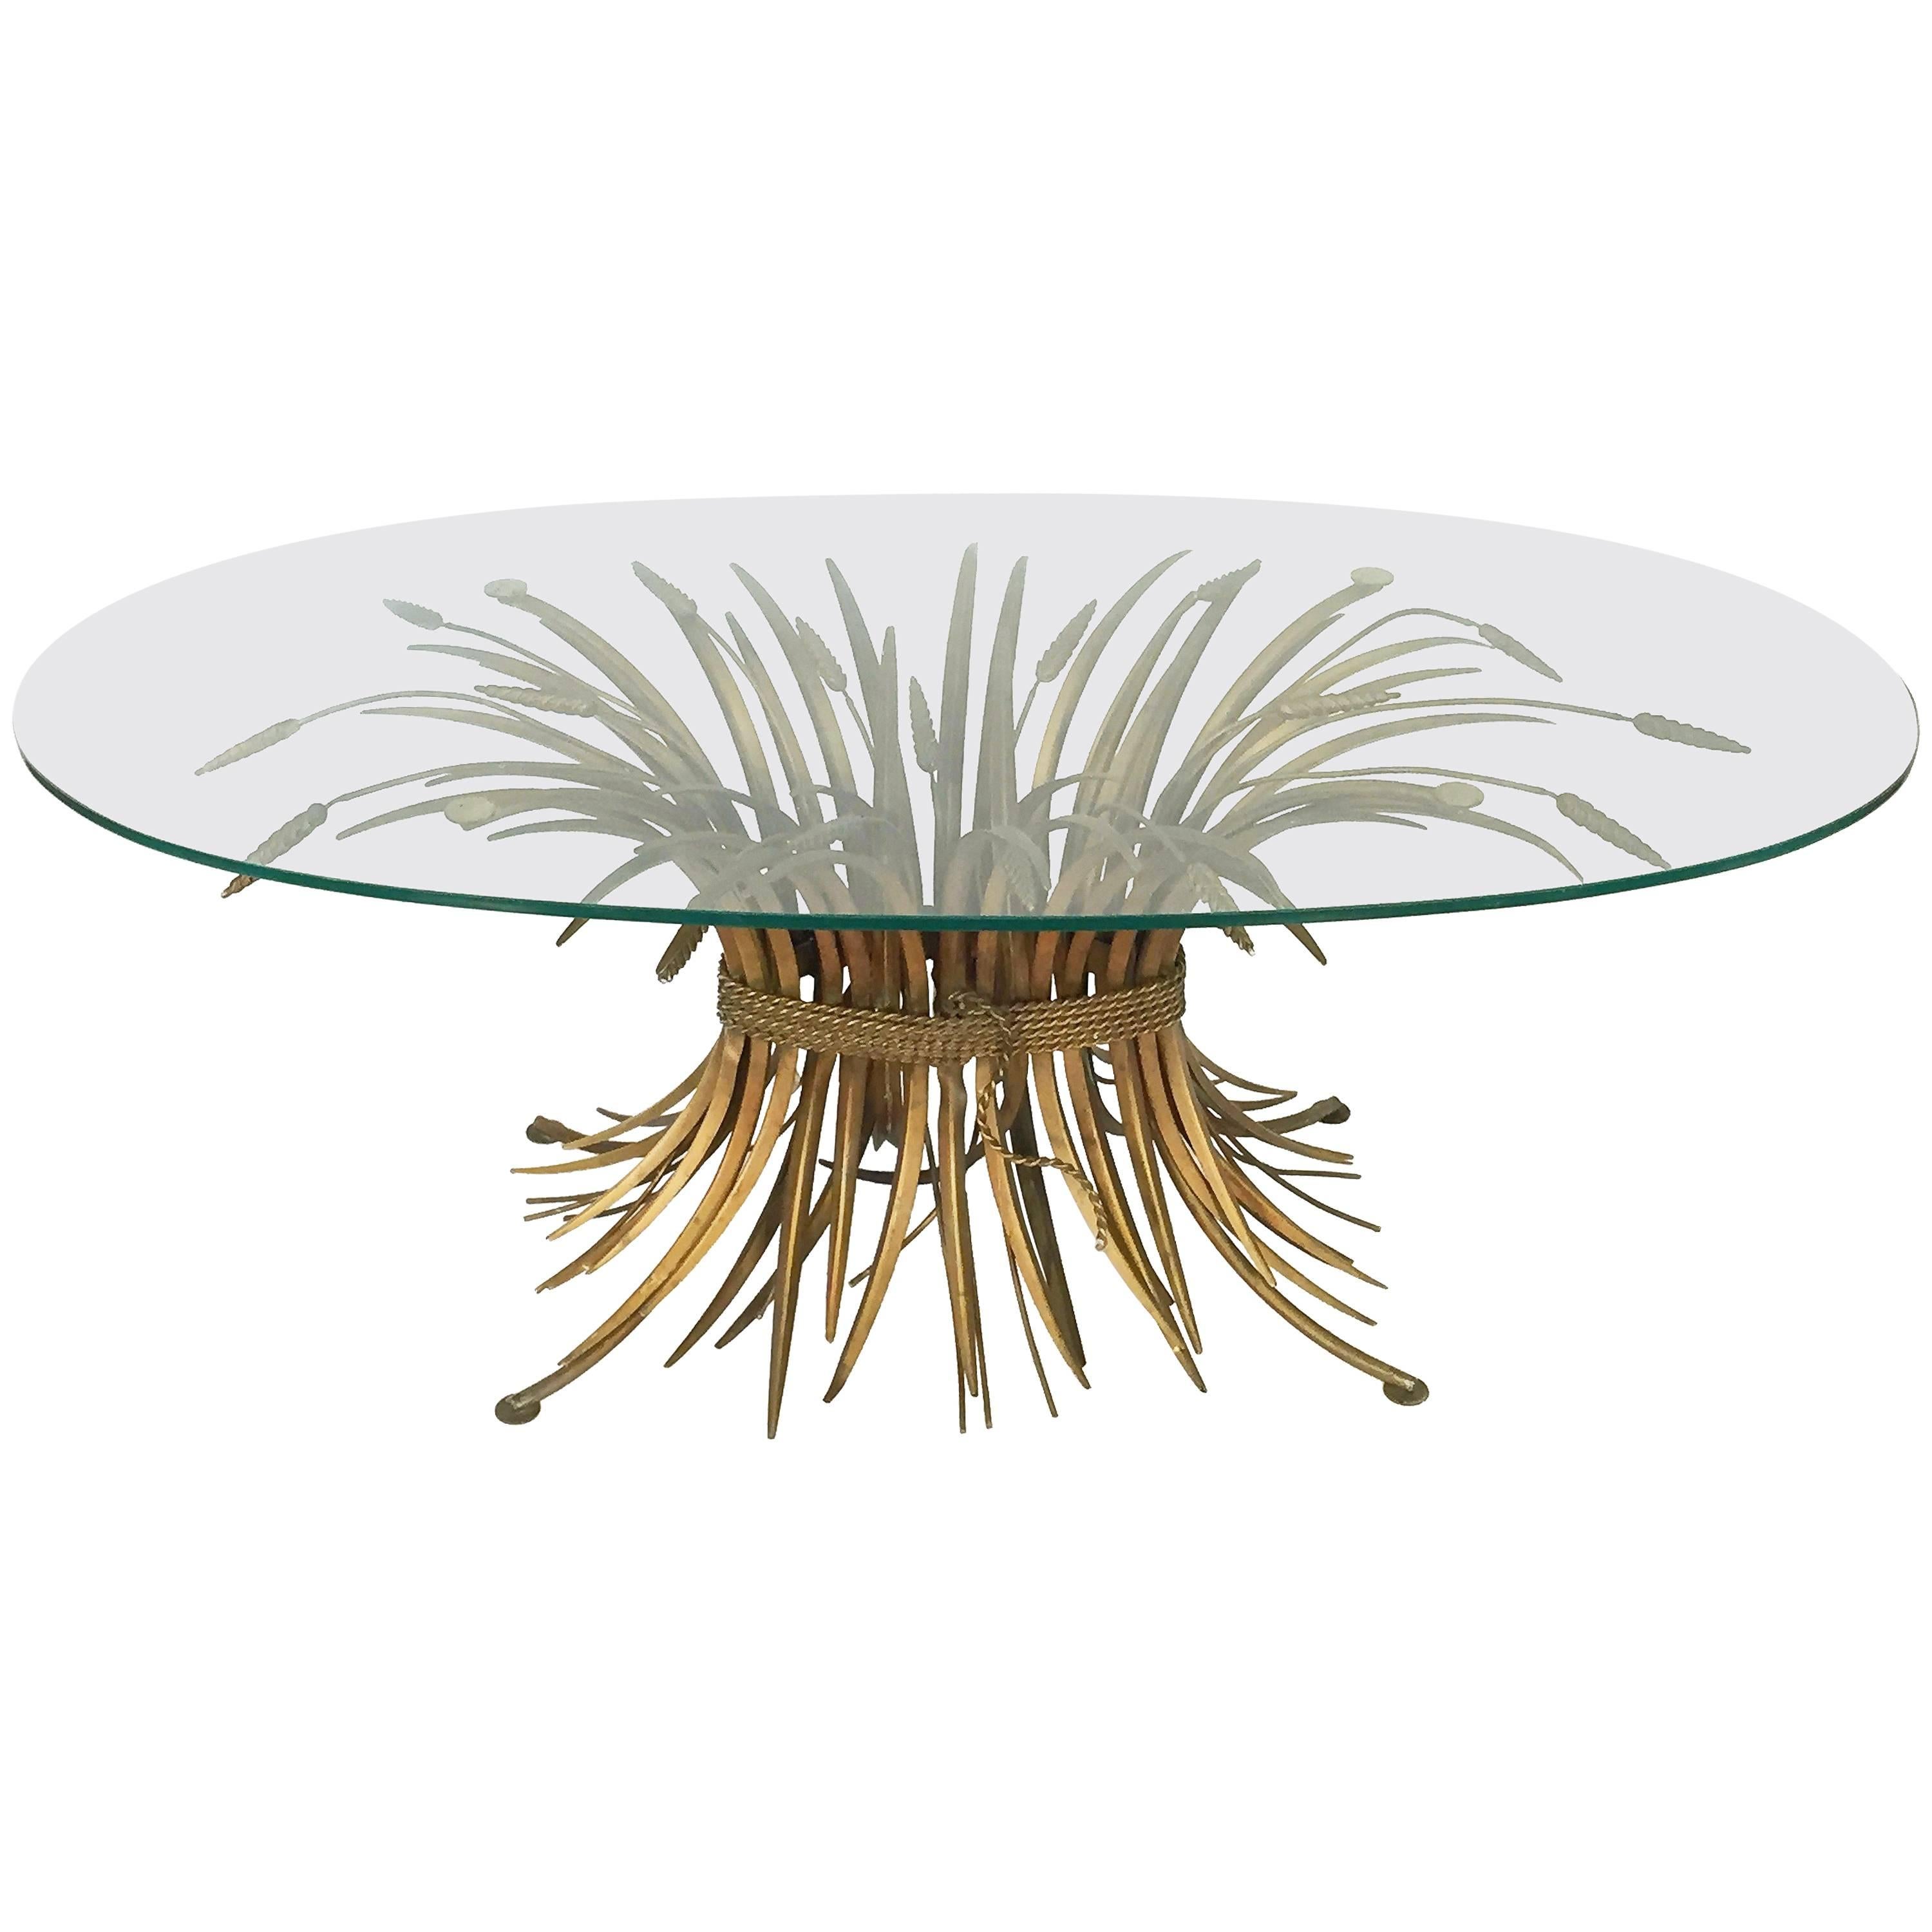 Italian Wheat Sheaf Oval Low Table of Gilt Metal and Glass